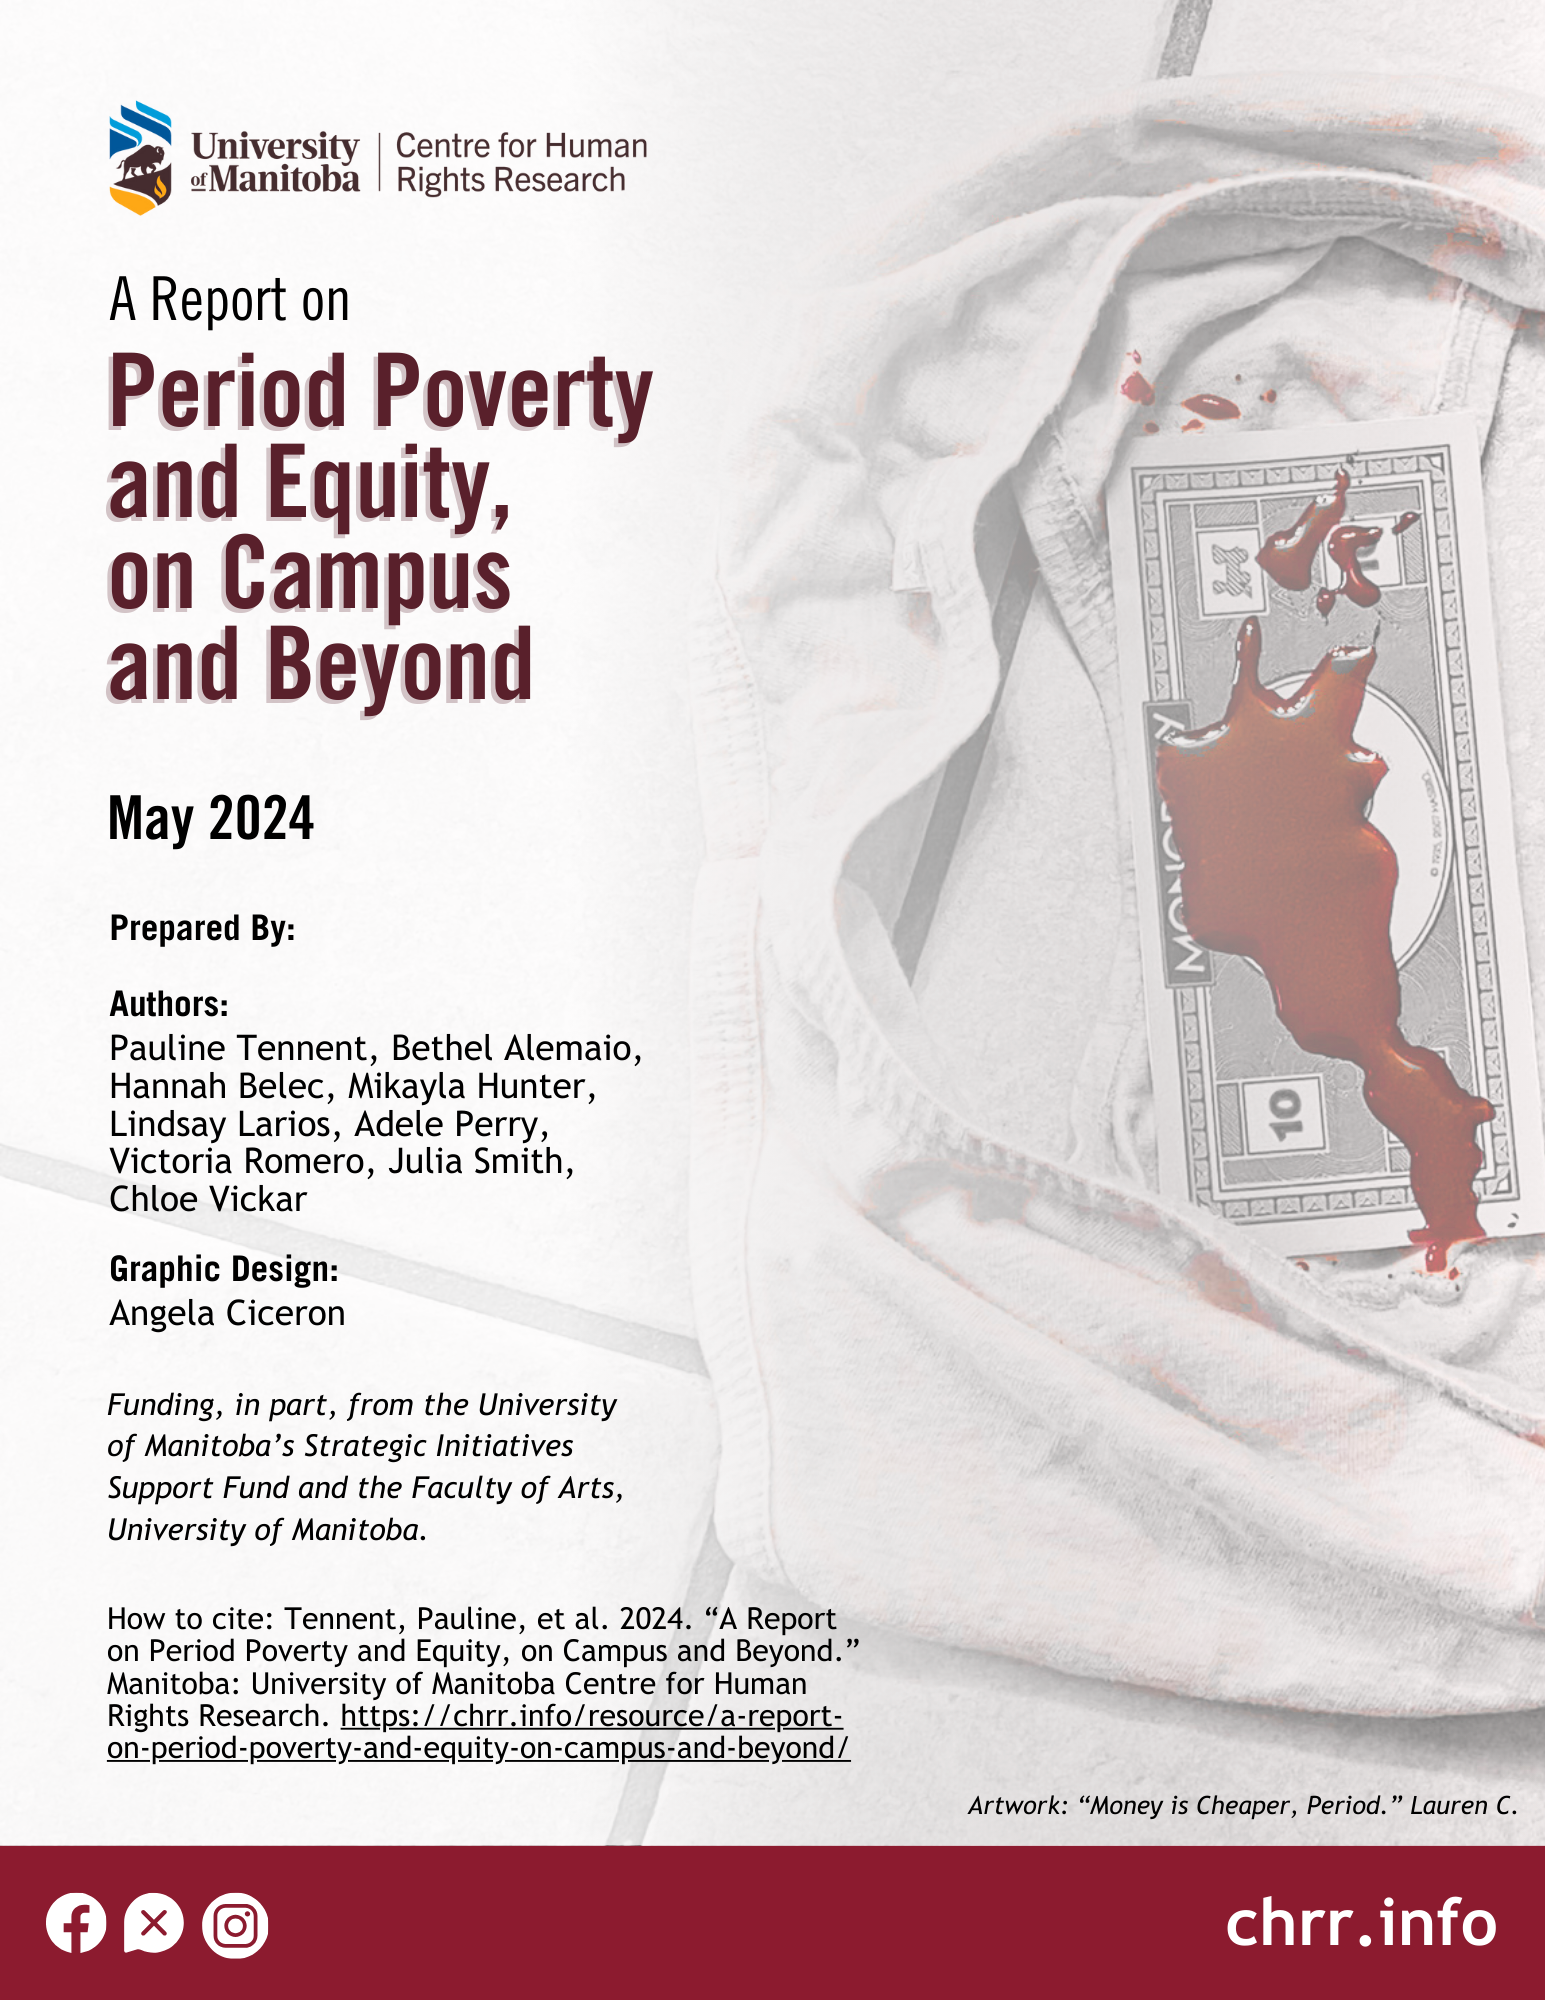 Cover Page of Period Poverty and Equity Final Report. It features artwork of a pair of underwear, with monopoly money on top, covered in what appears to be blood.